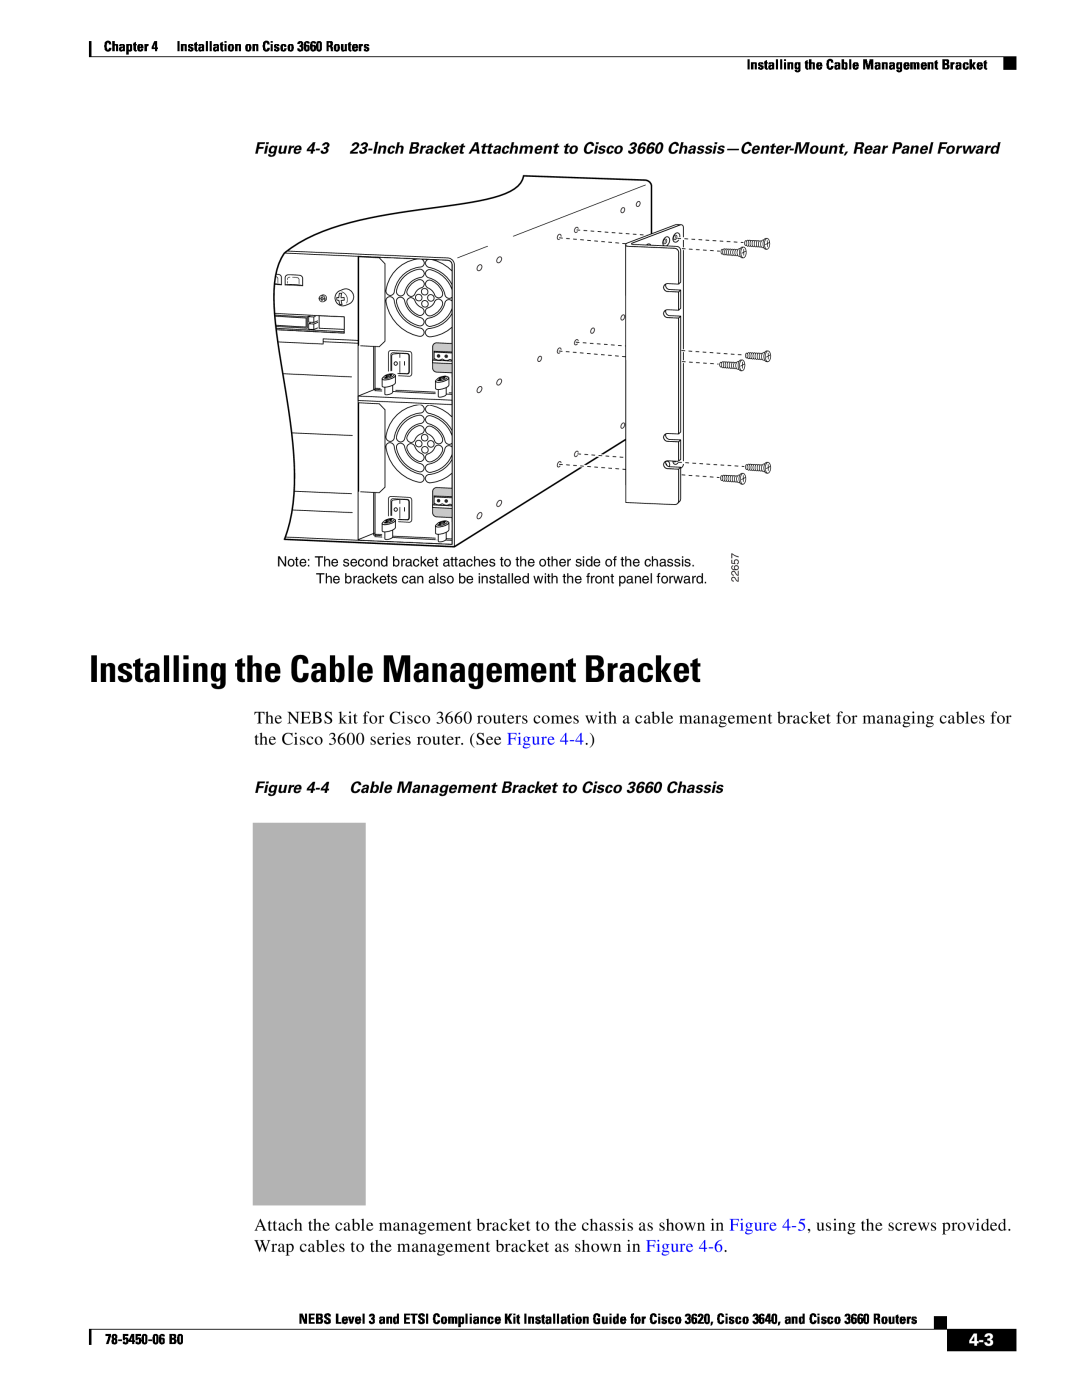 Cisco Systems manual Installing the Cable Management Bracket, 4 Cable Management Bracket to Cisco 3660 Chassis 